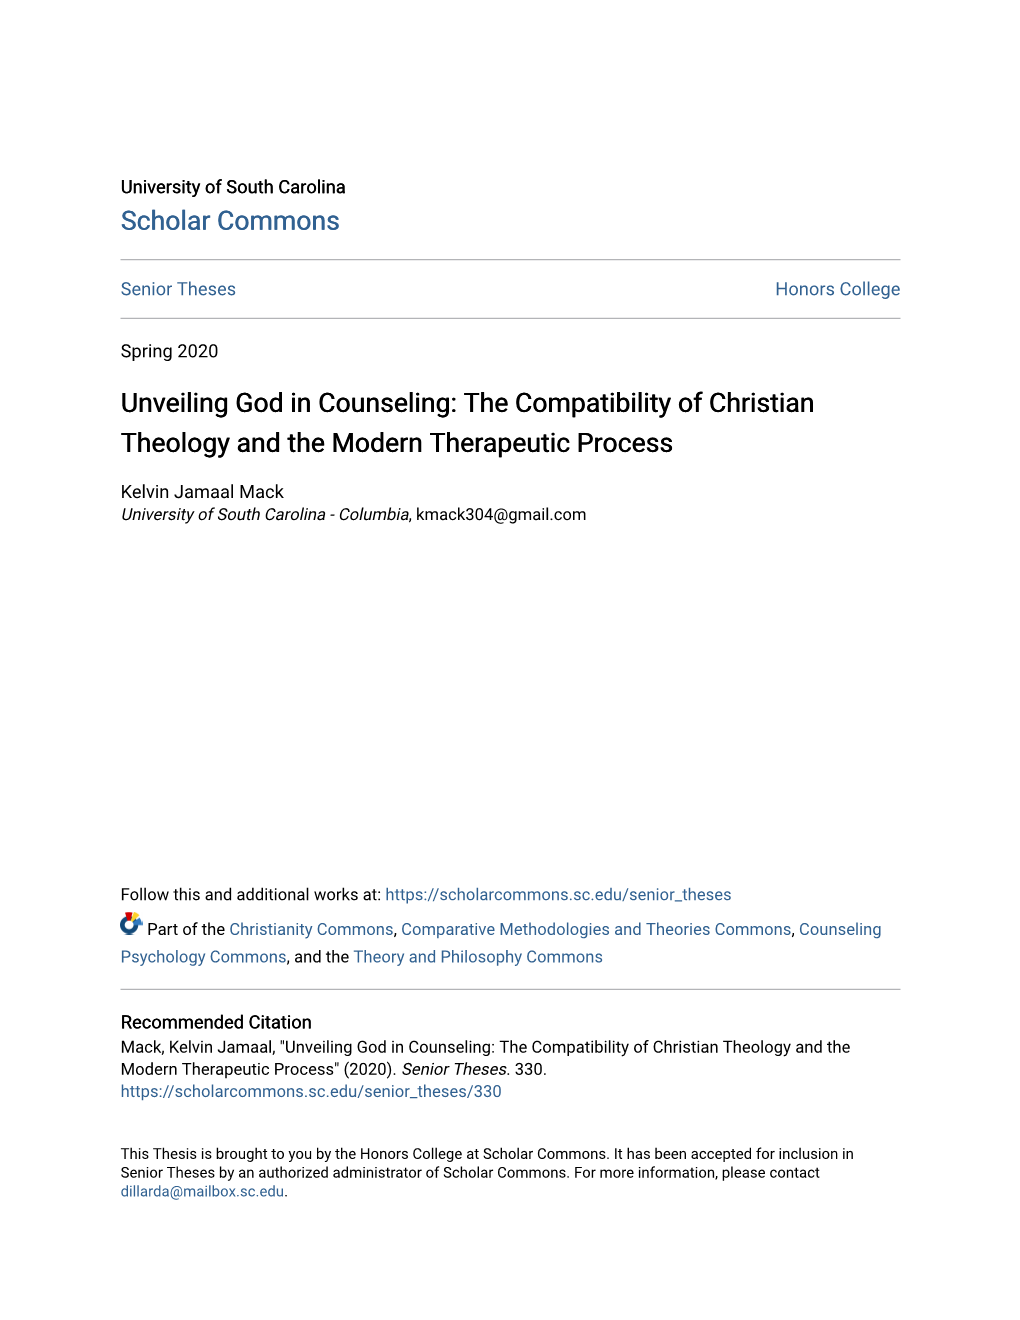 Unveiling God in Counseling: the Compatibility of Christian Theology and the Modern Therapeutic Process